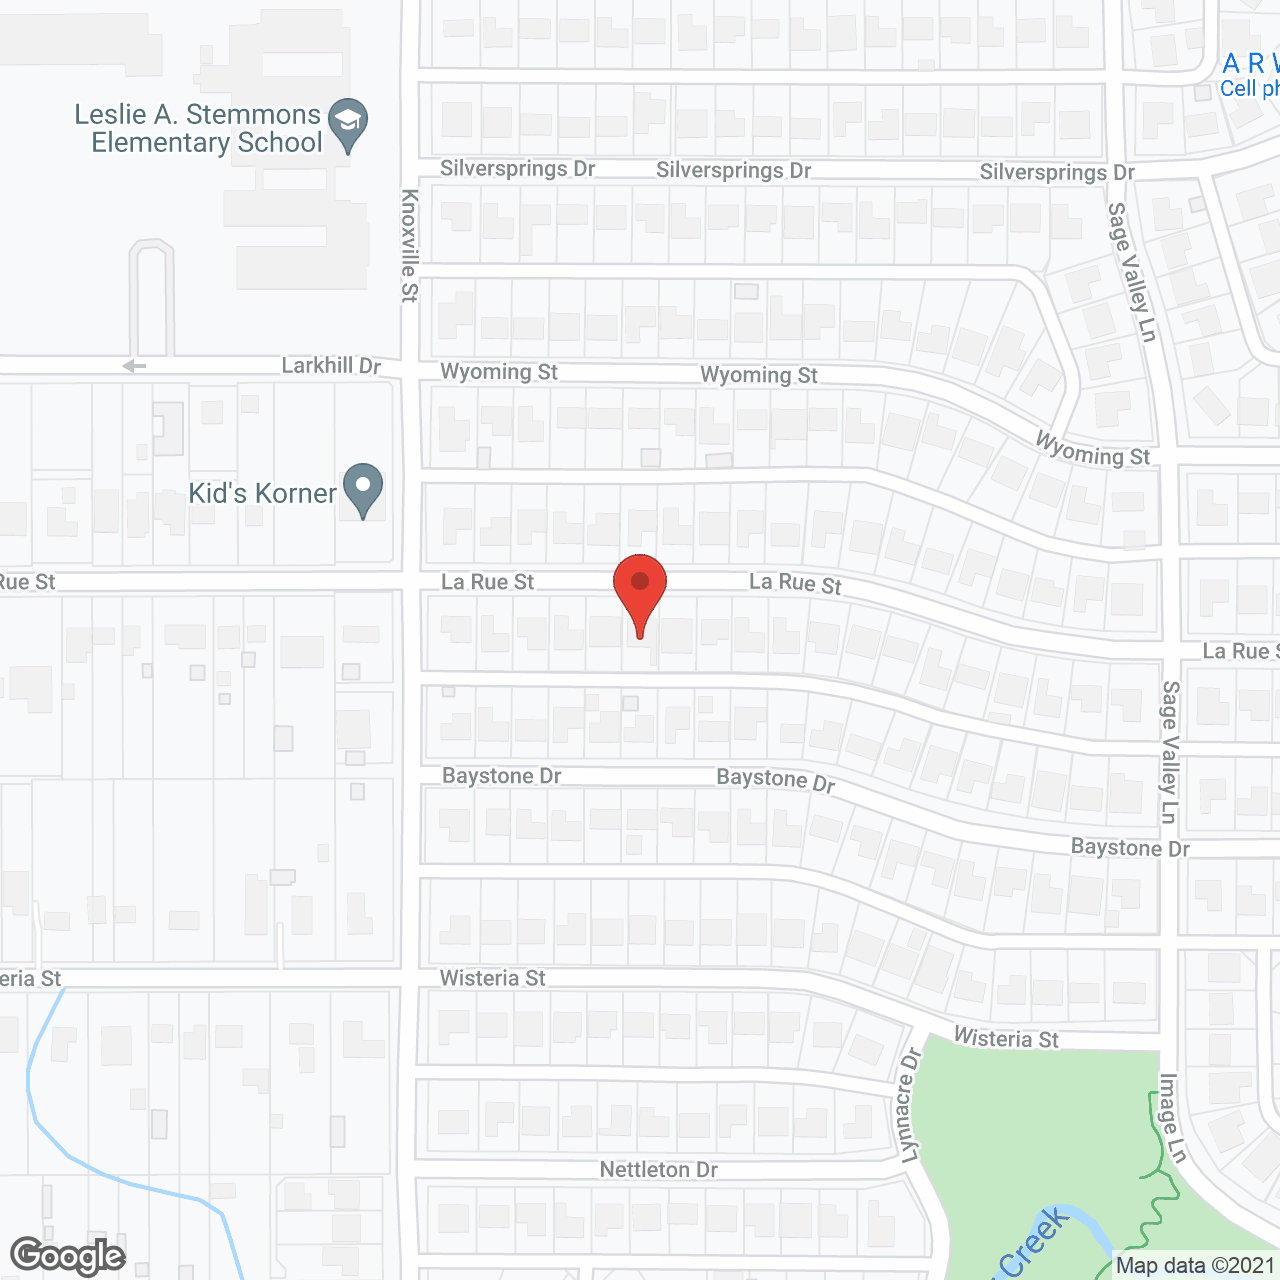 Albert Assisted Living Facility in google map